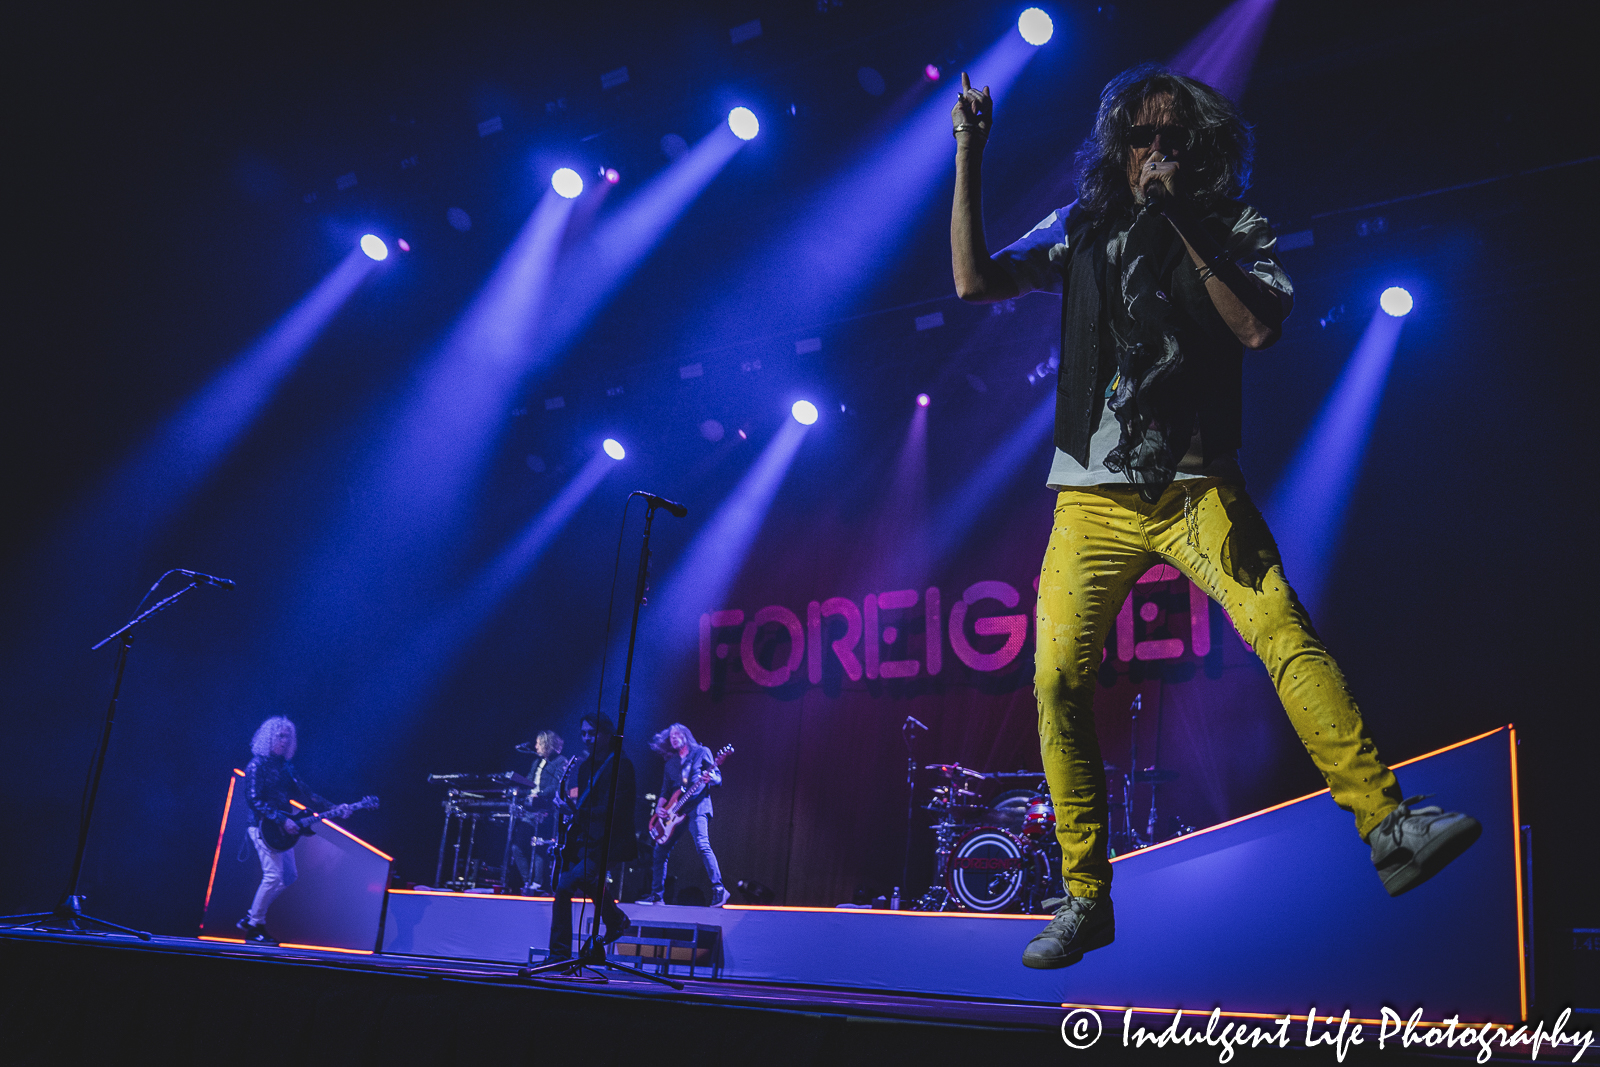 Frontman Kelly Hansen and his band Foreigner performing "Head Games" at Landon Arena inside of Stormont Vail Events Center in Topeka, KS on May 2, 2023.